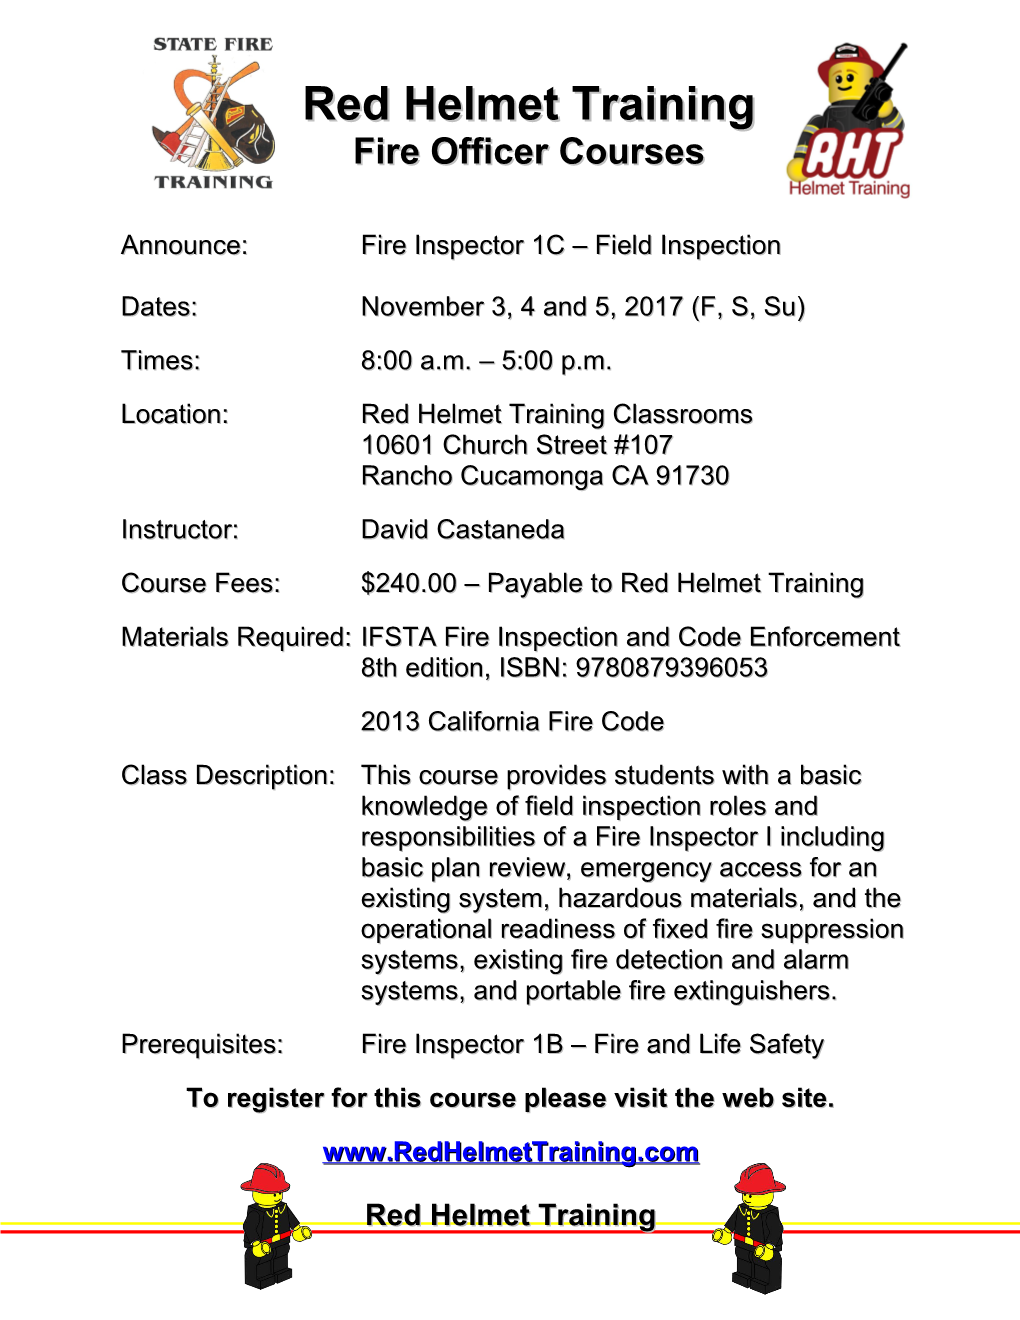 Fire Officer Courses s2